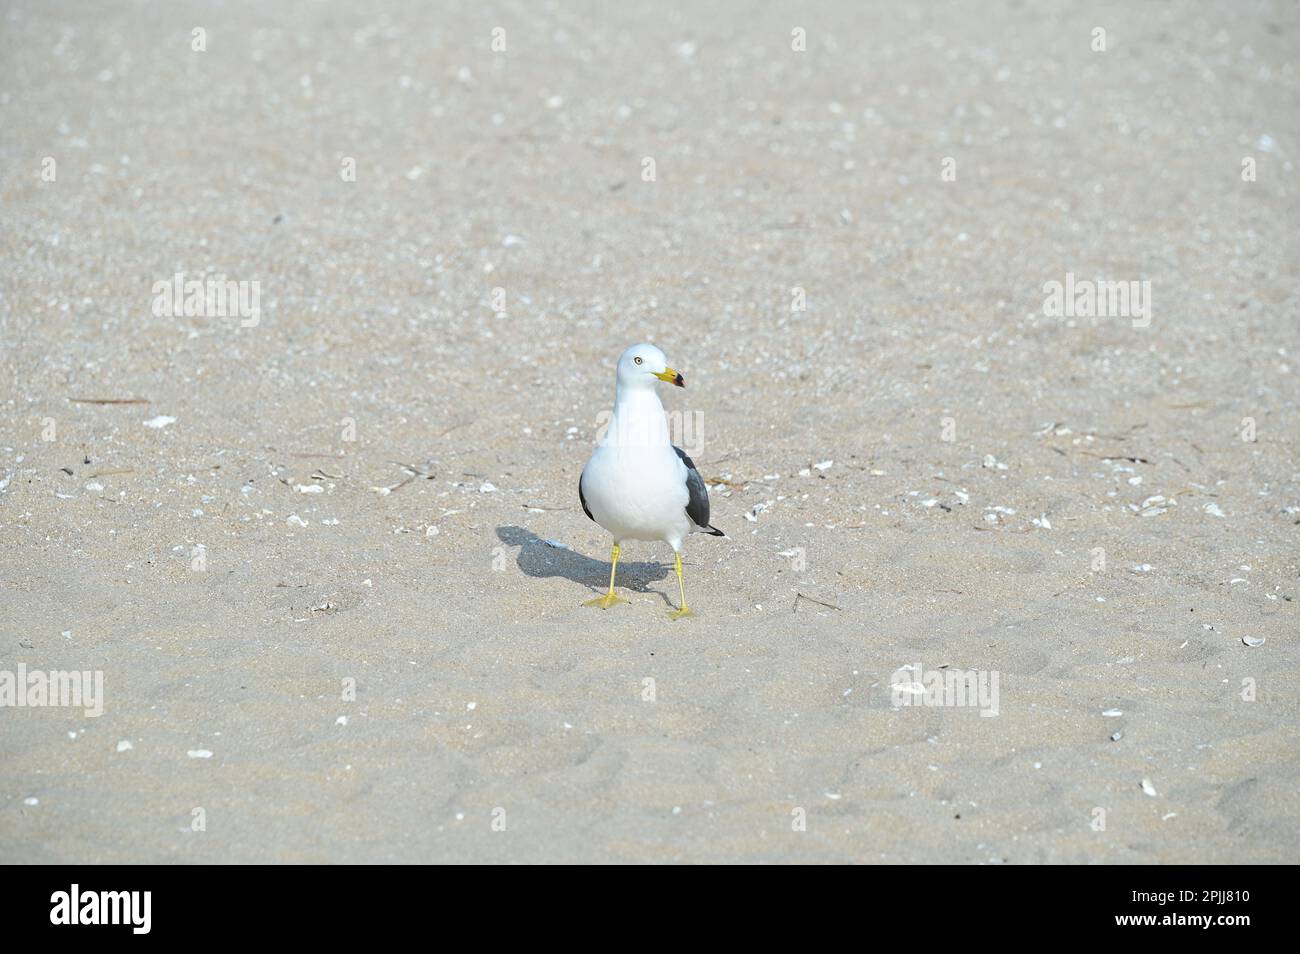 A seagull is sitting on a sandy beach Stock Photo